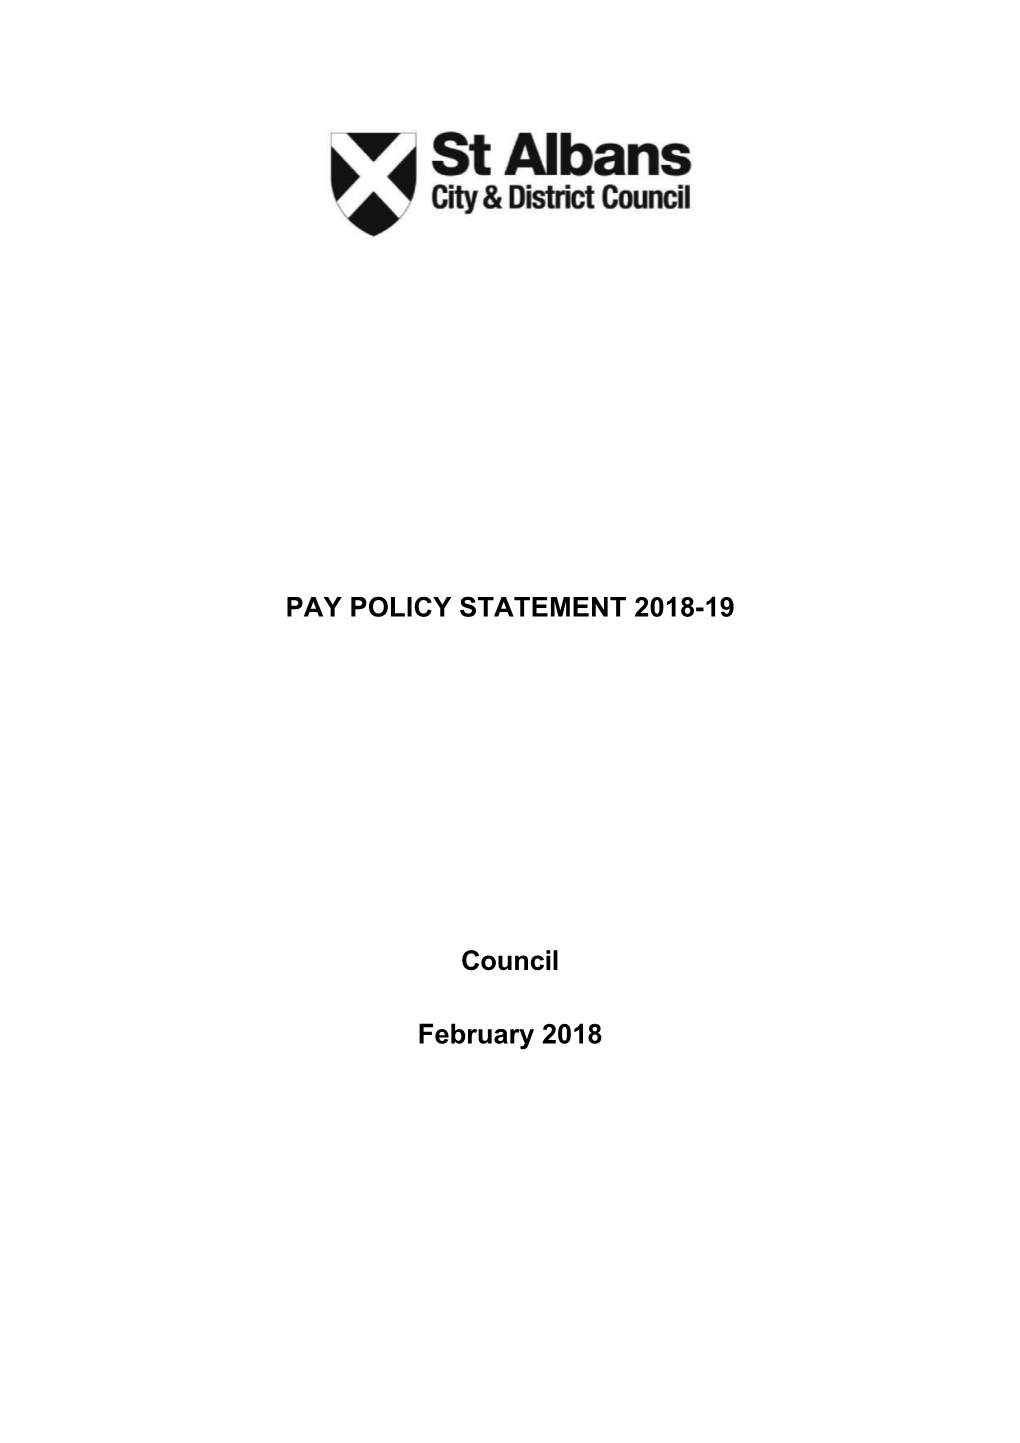 Pay Policy Statement 2018-19